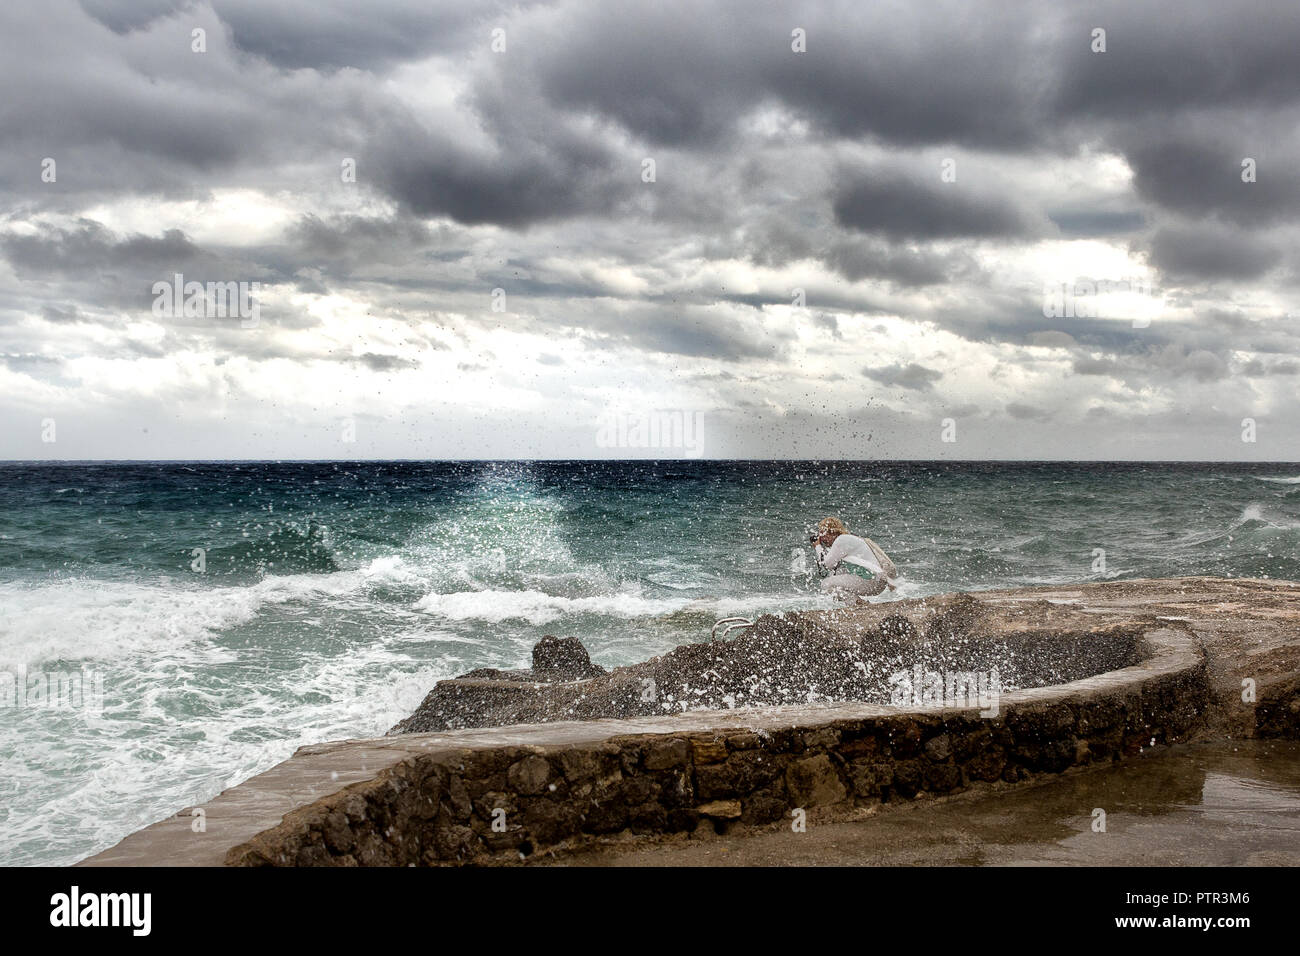 Europe Spain Mallorca - strong storm in the east, high waves hit the coast, photographer photographs the strong storm Stock Photo